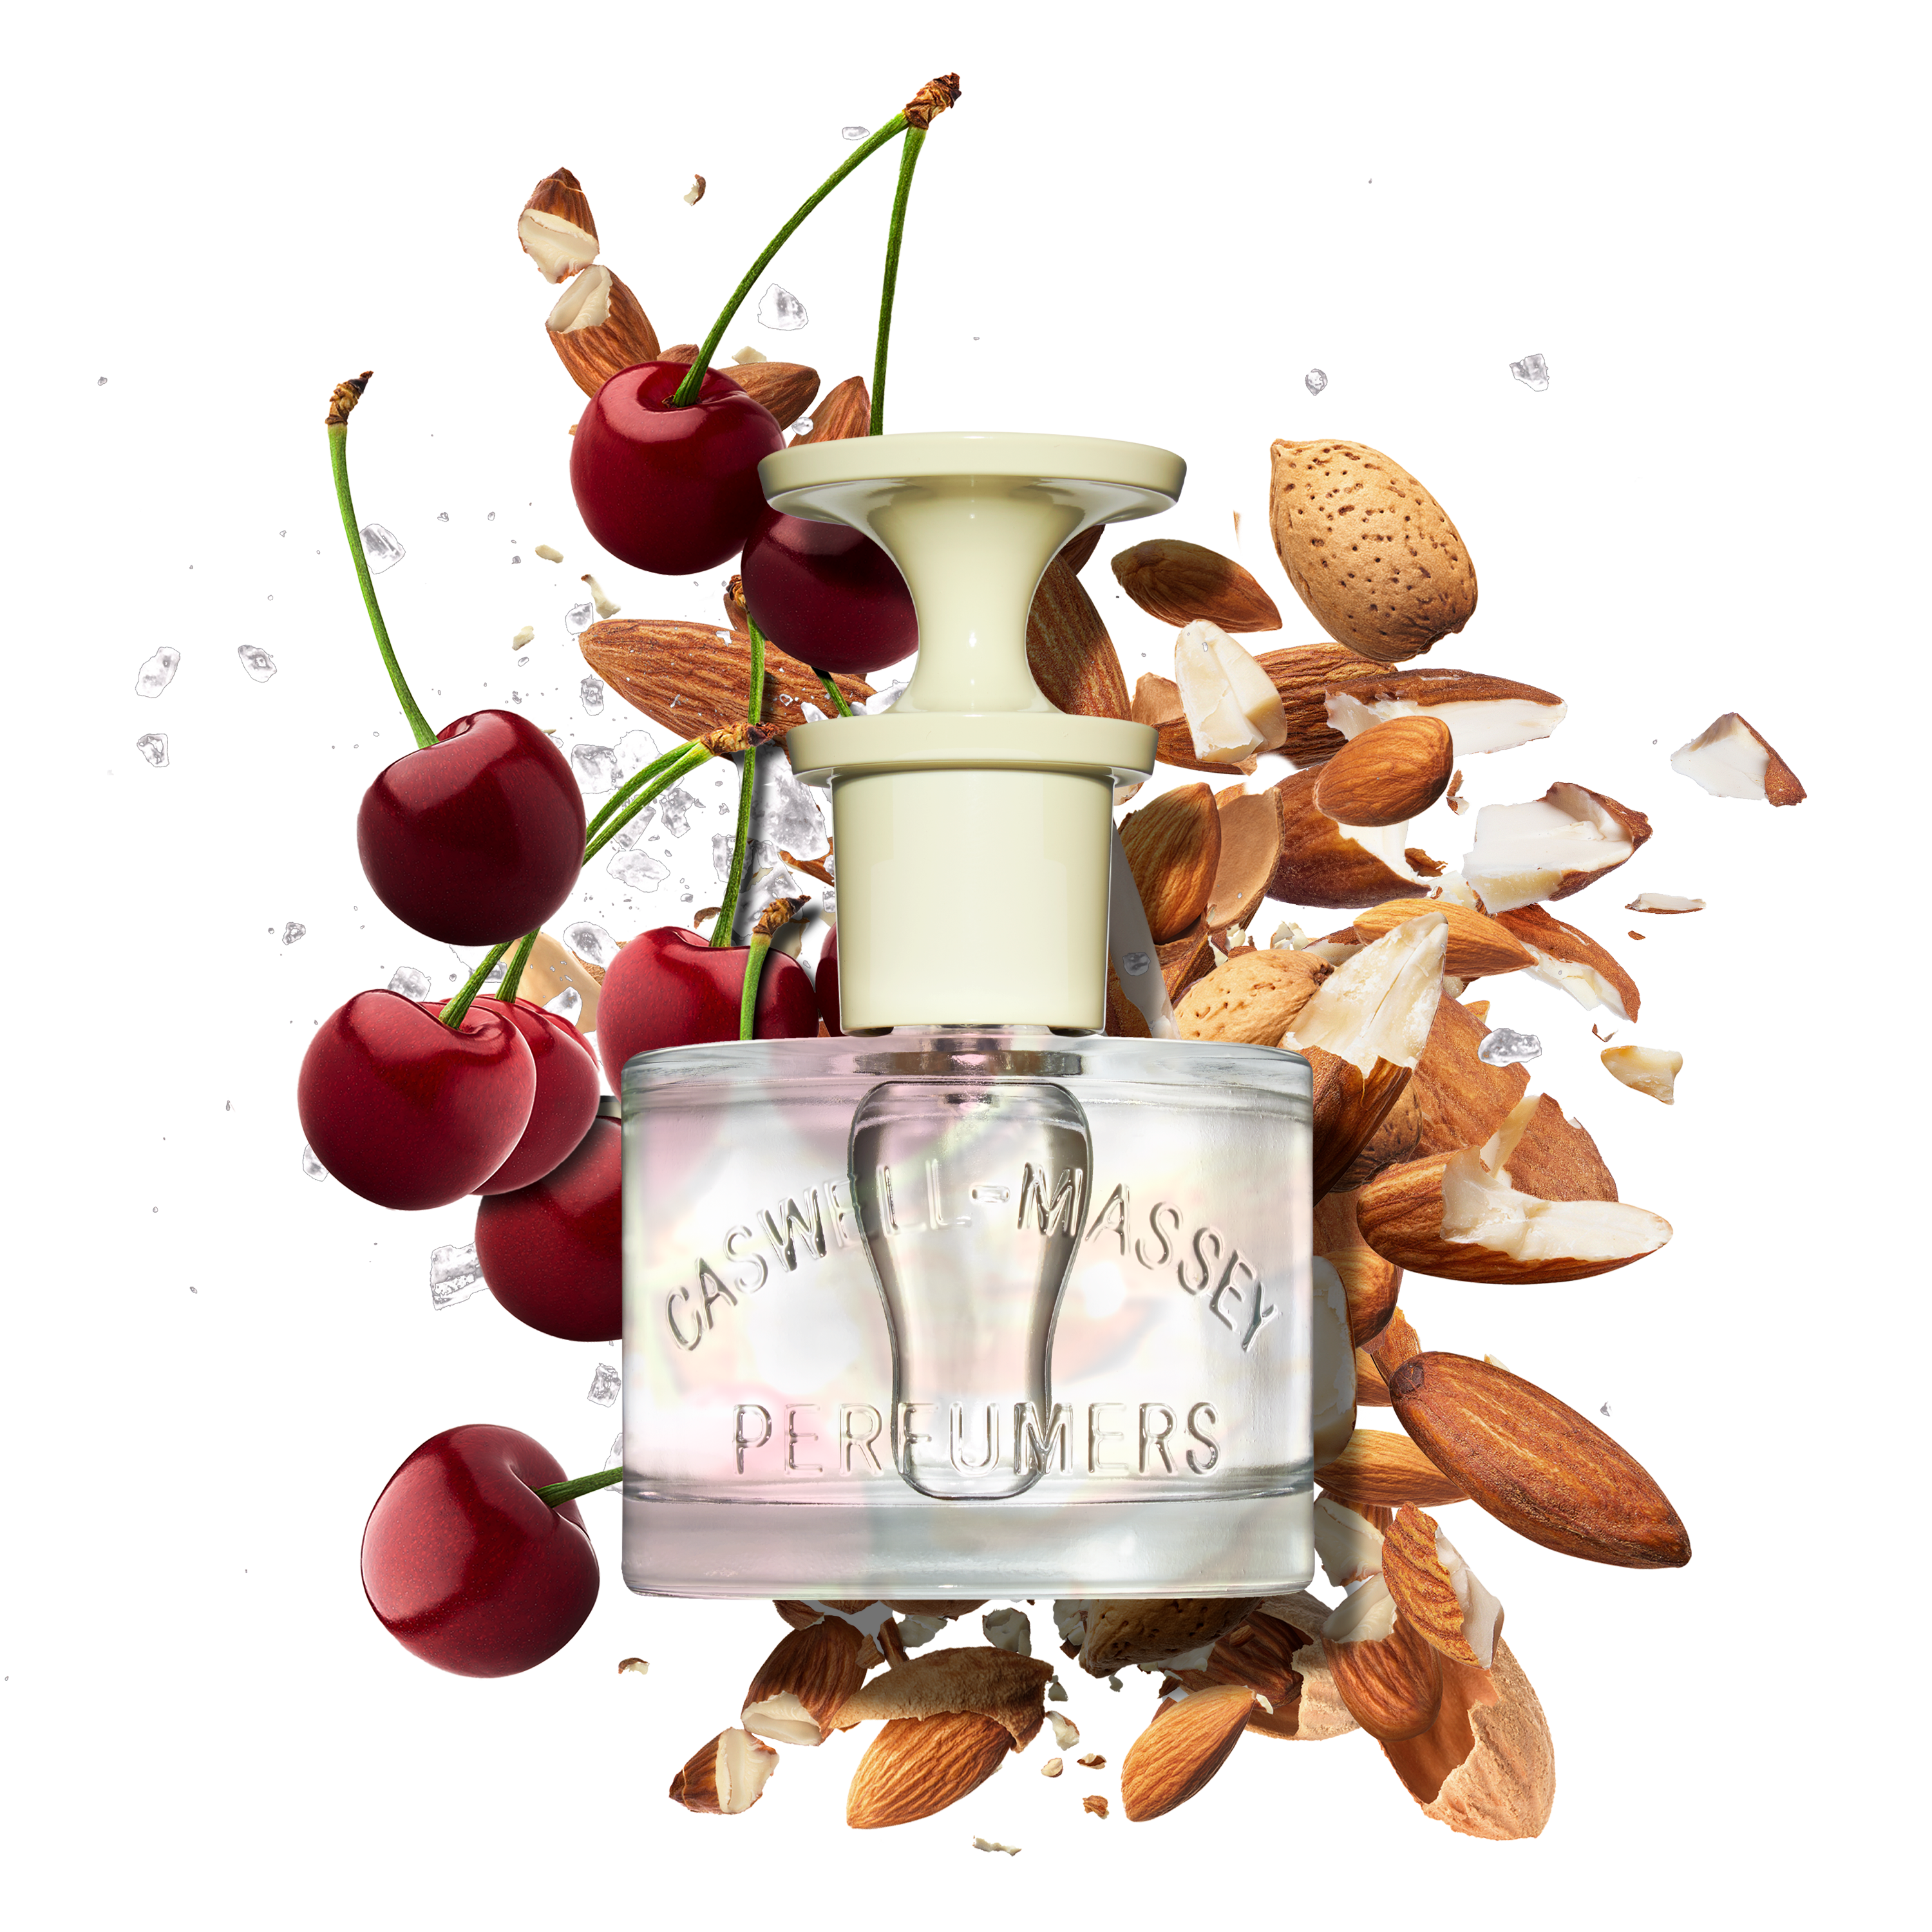 Caswell-Massey Almond Eau de Toilette Fragrance, 60 mL bottle with almonds, cherries, and salt in background to signify scent notes